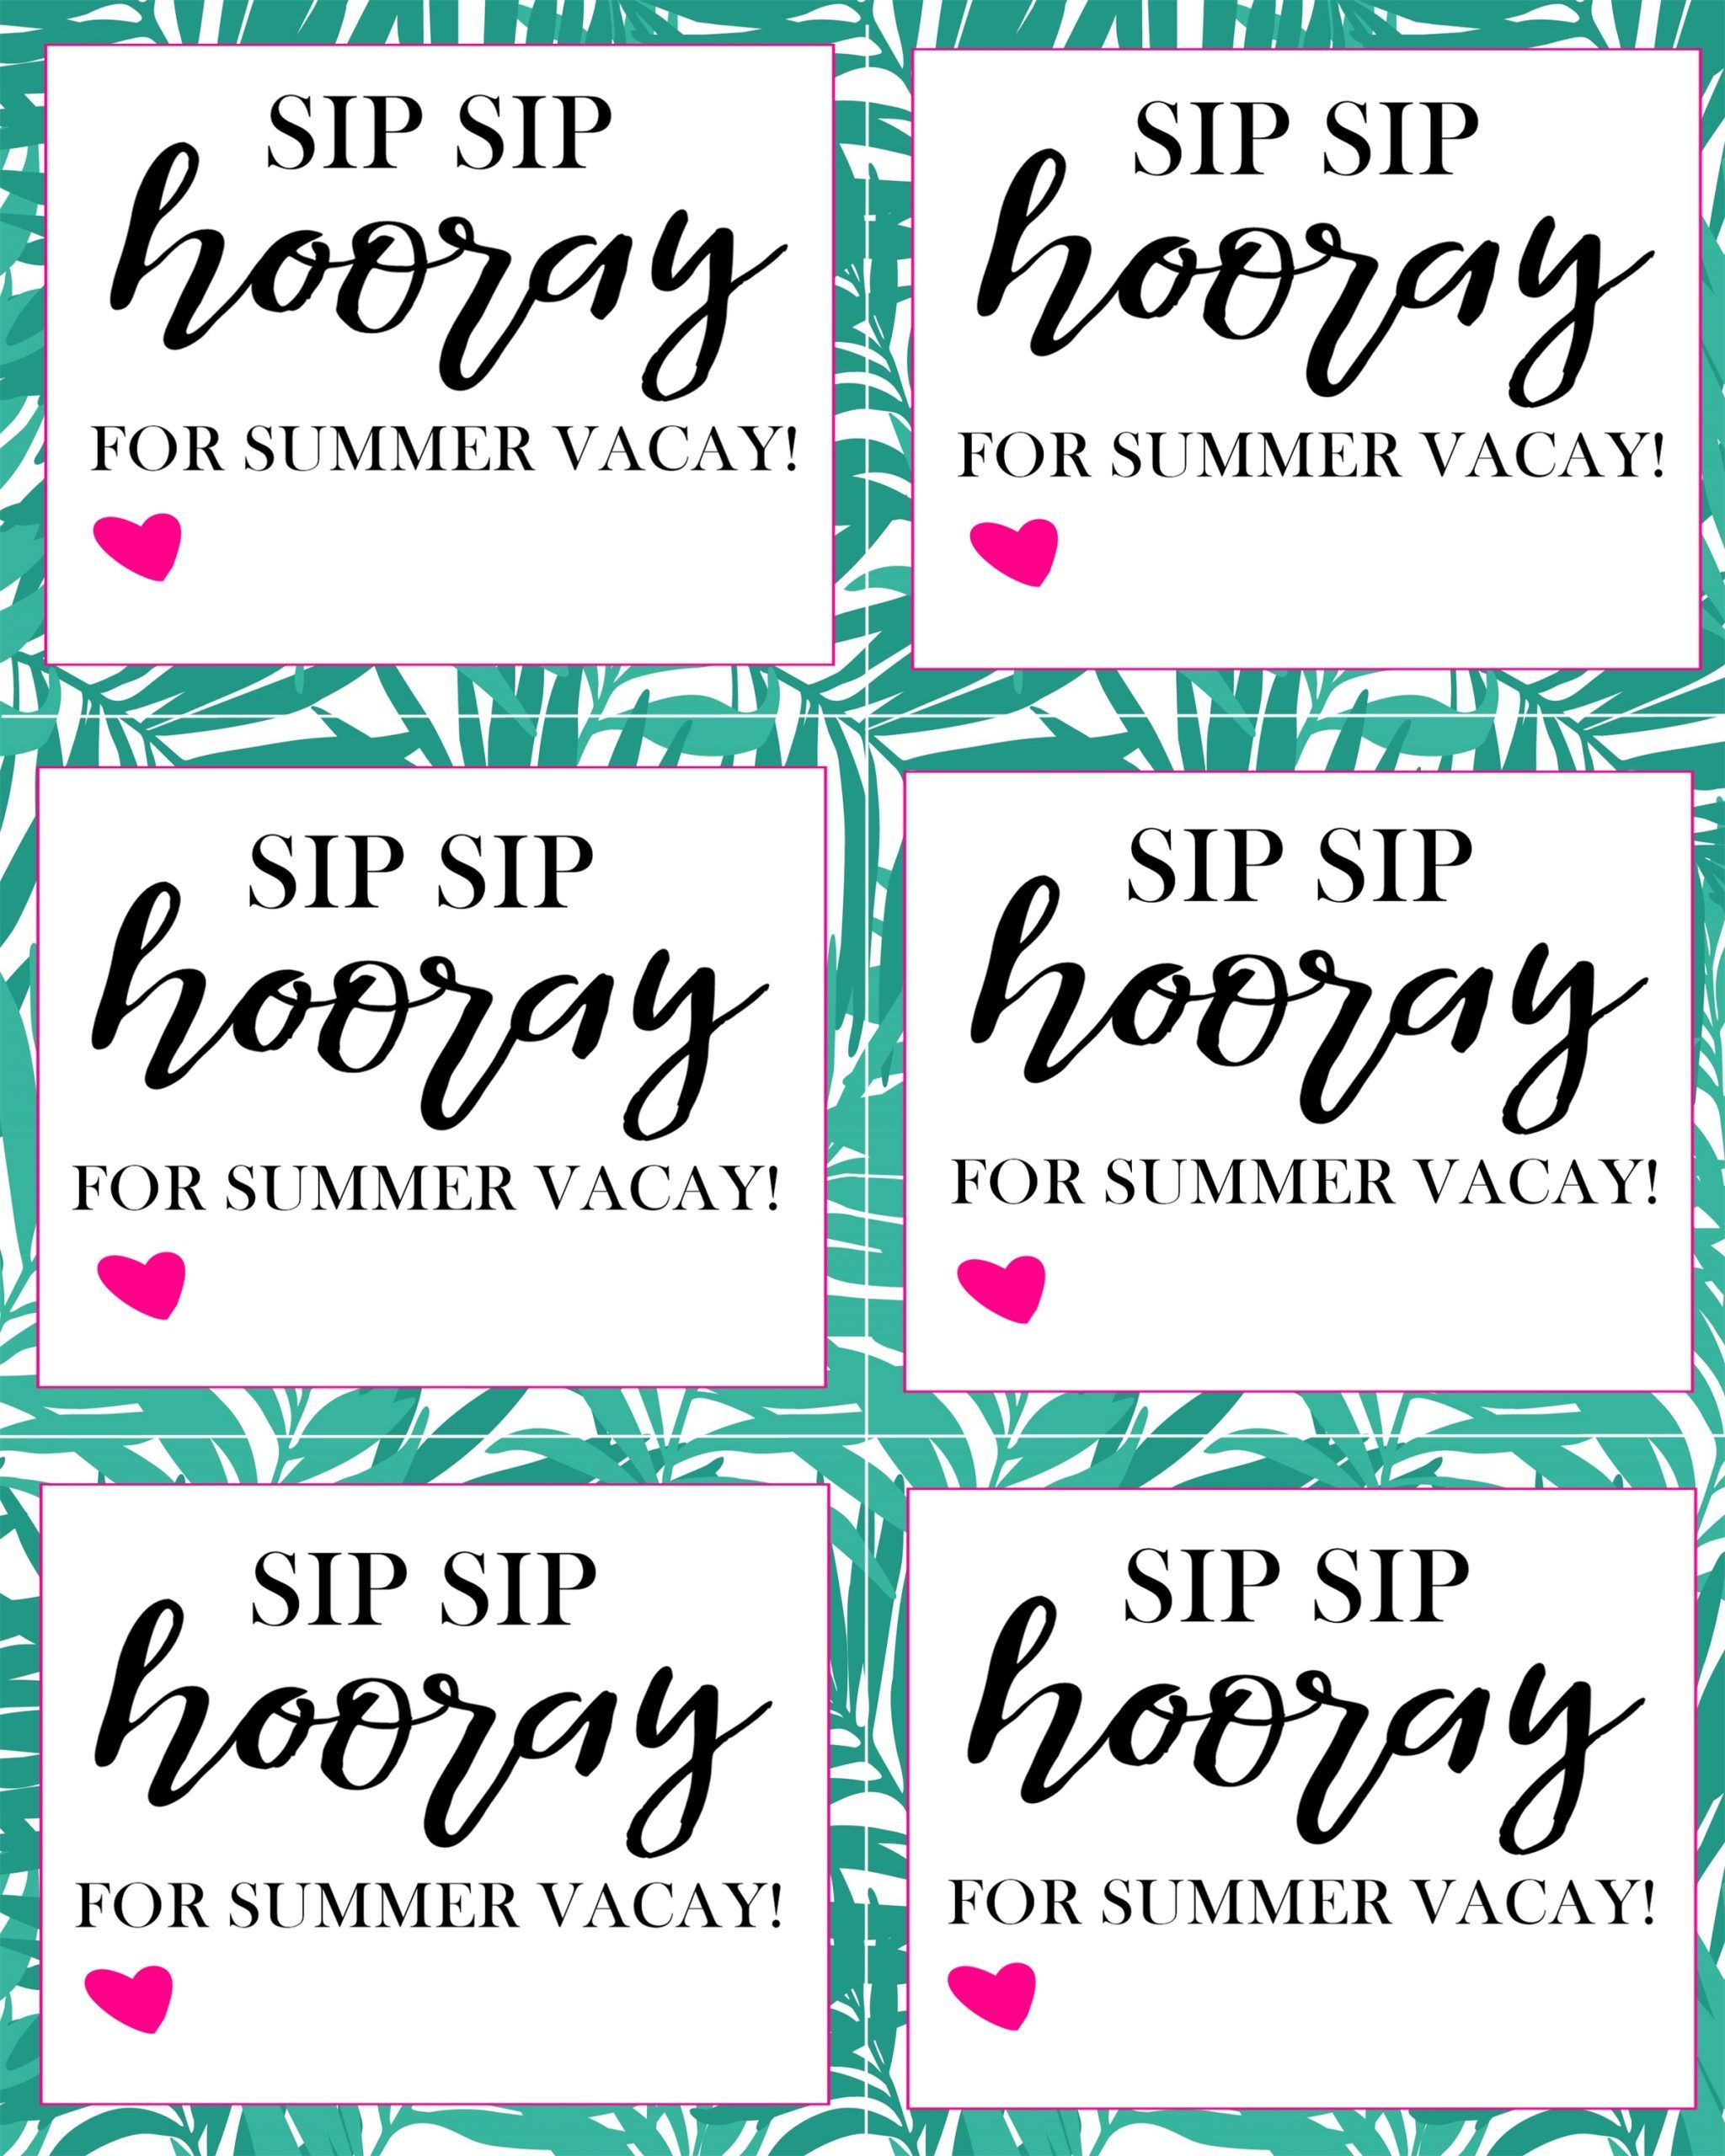 Sip Sip Hooray for Summer Vacay- Teacher gift and printable - Crisp Collective